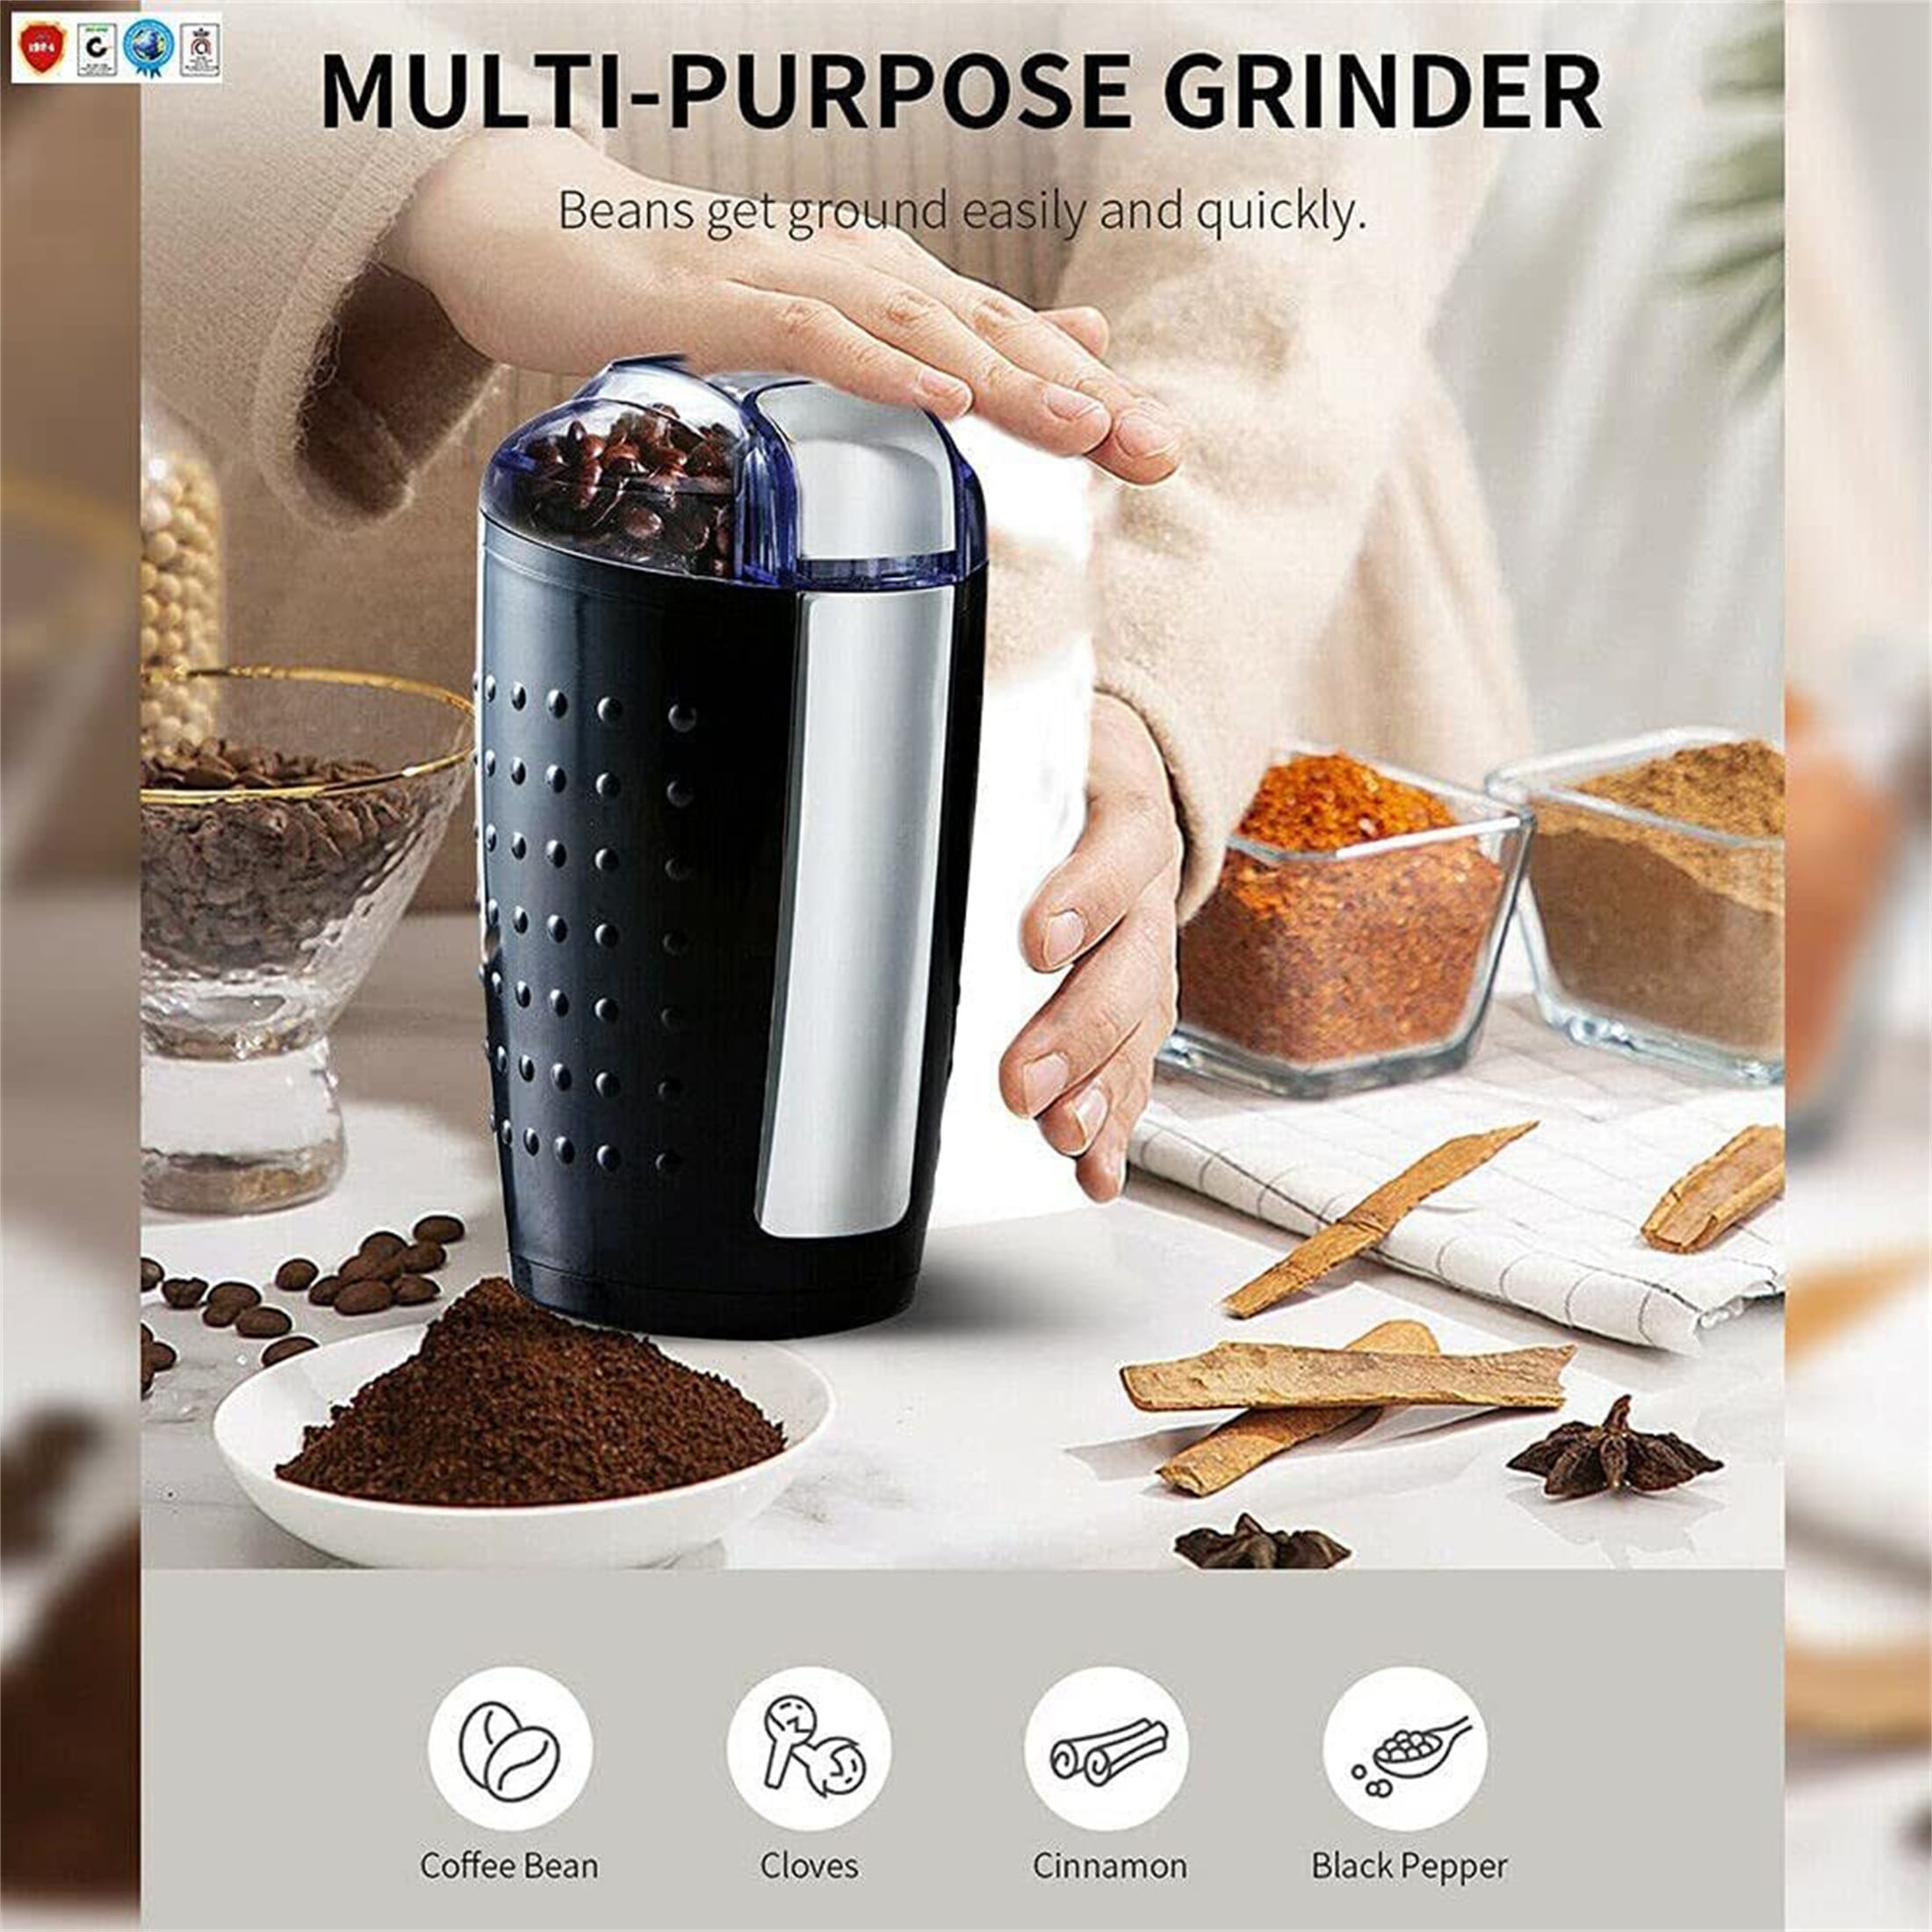 https://ak1.ostkcdn.com/images/products/is/images/direct/42eaa747cf0ee99740e8adf042cff064e8202418/Coffee-Grinder-Spice-Nut-Grinders-Blender-Kitchen-Living-Room-Black.jpg